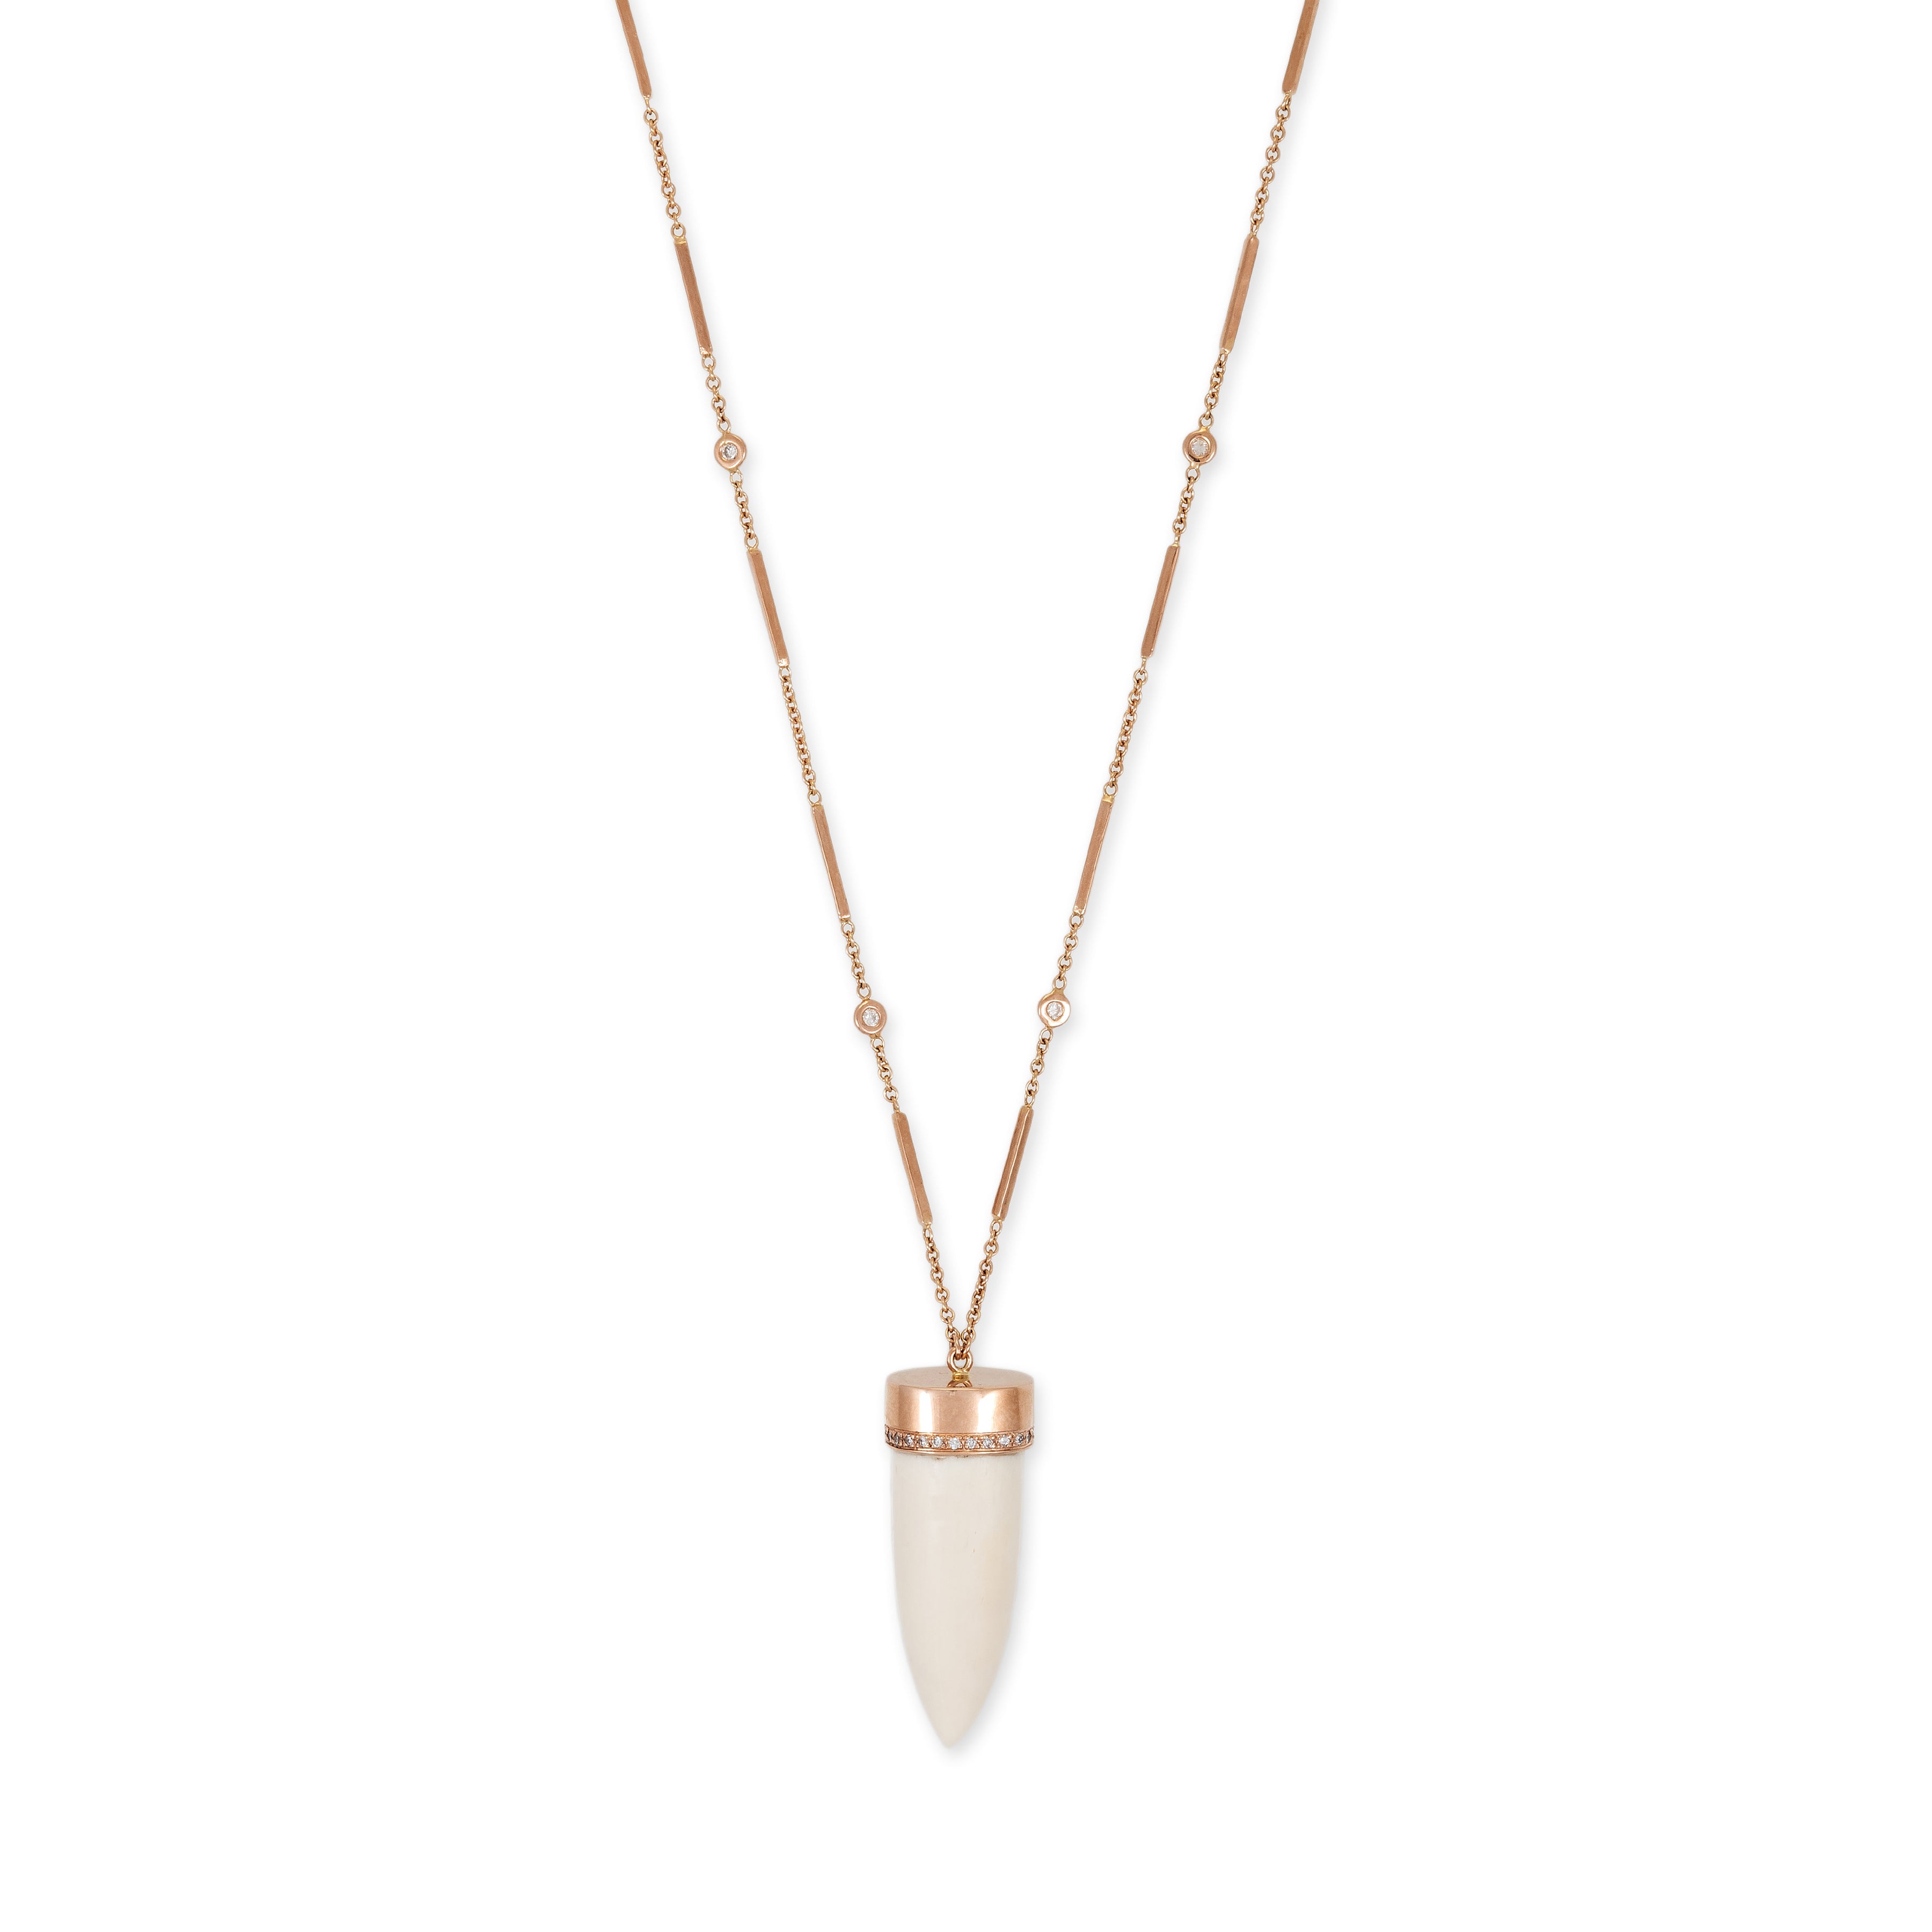 PAVE CAP THICK BONE TUSK CHARM ON SMOOTH BAR NECKLACE